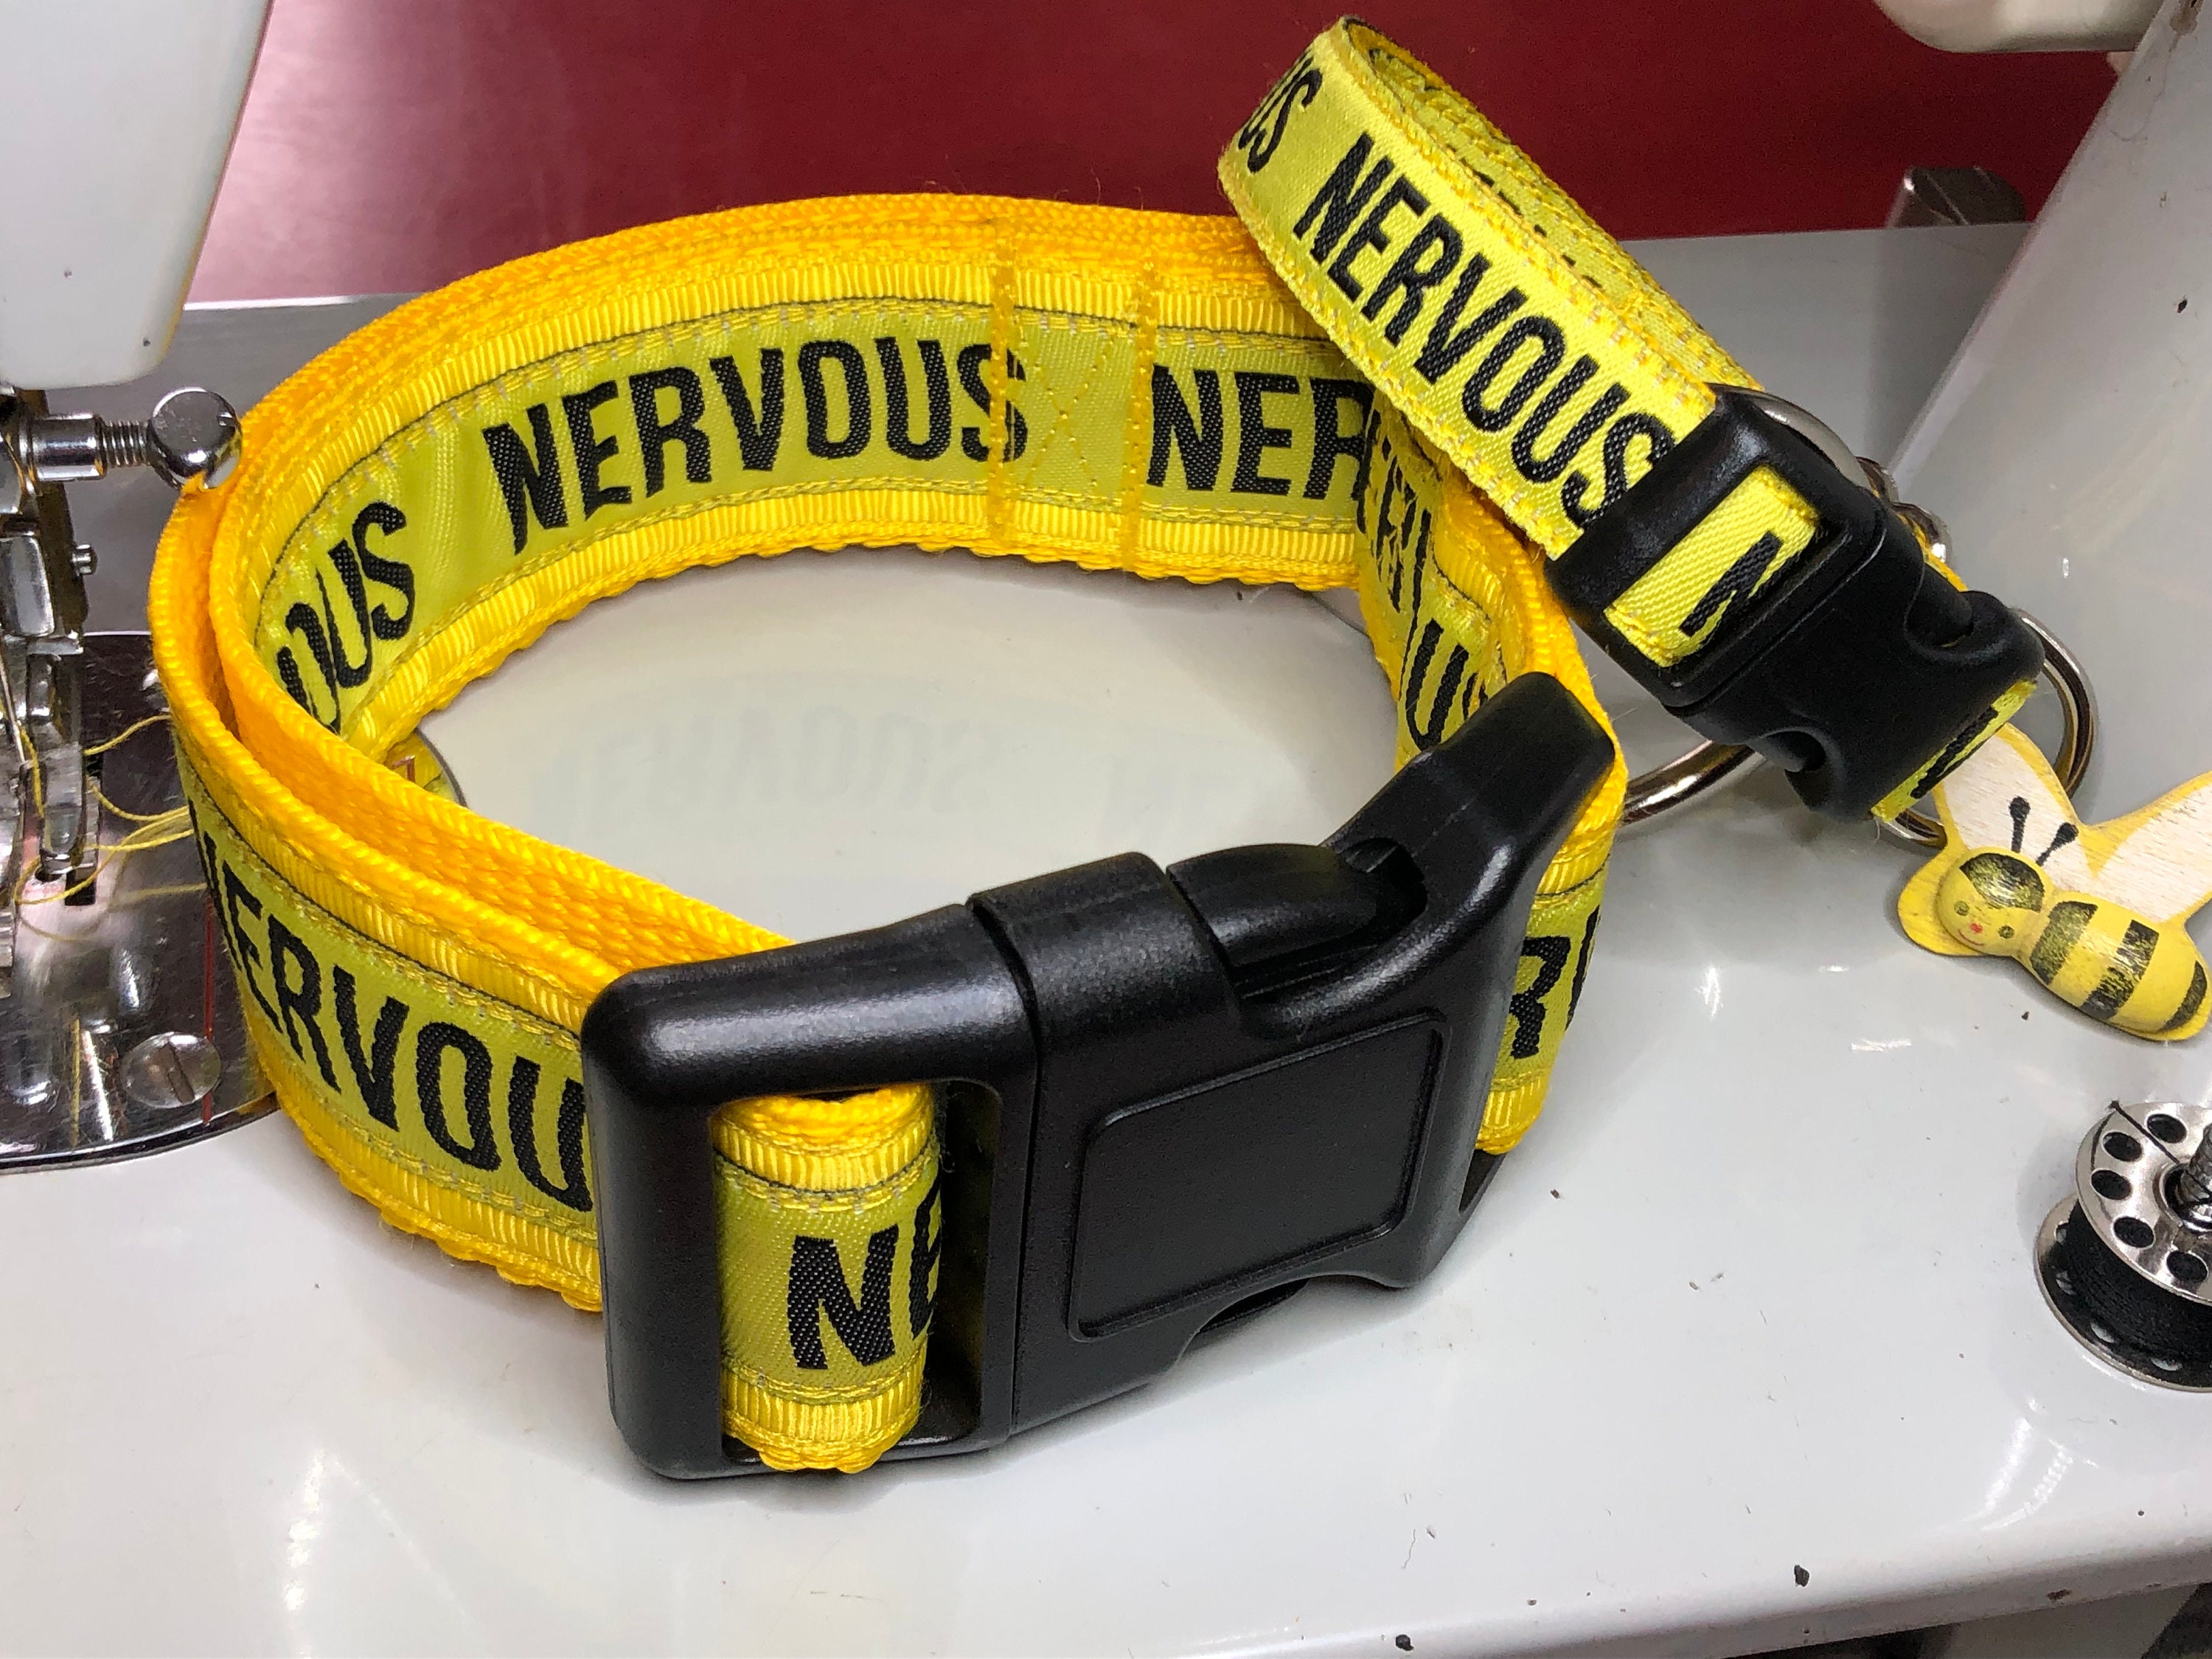 Nervous Dog Ask to Pet Leash Wrap Sleeve Made With VELCRO® Brand Hook  Fastener Custom Leash Cover Nervous Dog Patches for Dog Leashes 